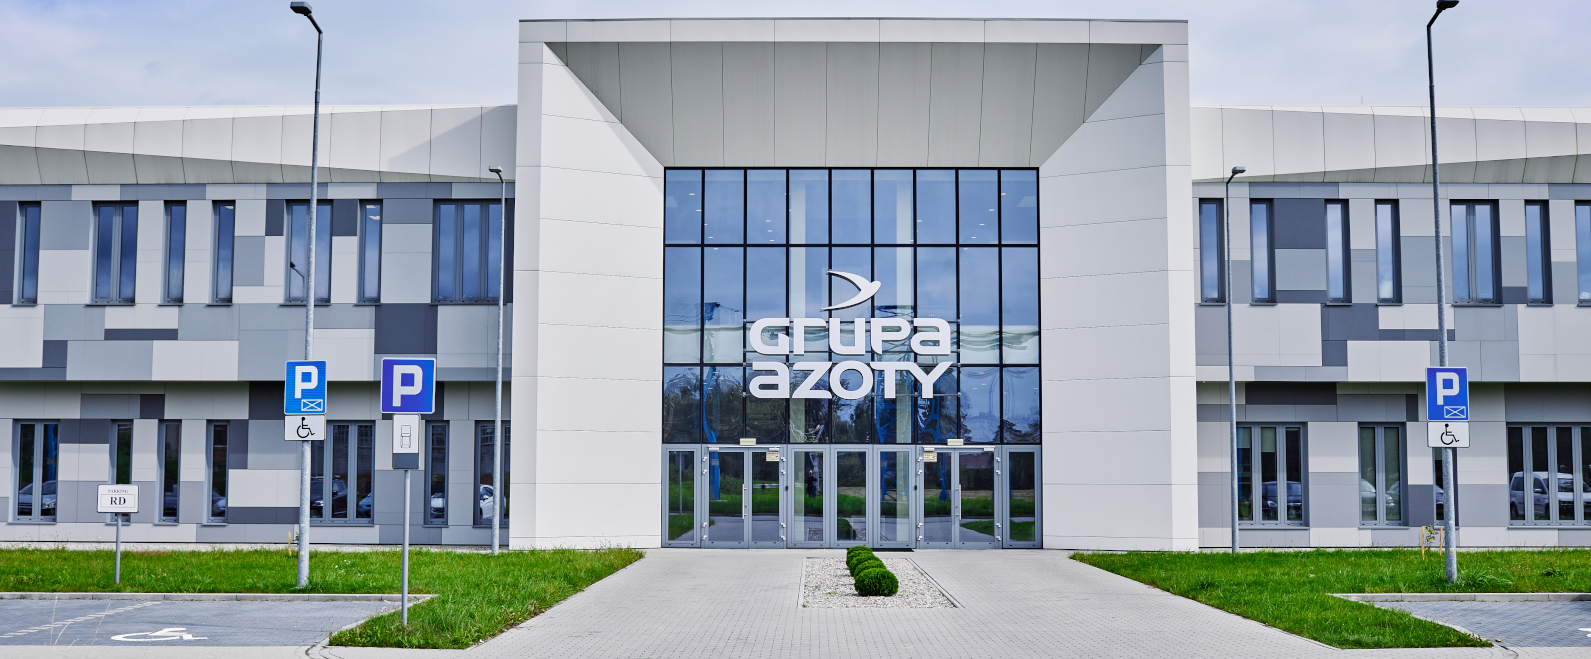 Appointment of Grupa Azoty S.A.’s Supervisory Board Members for the Twelfth Term